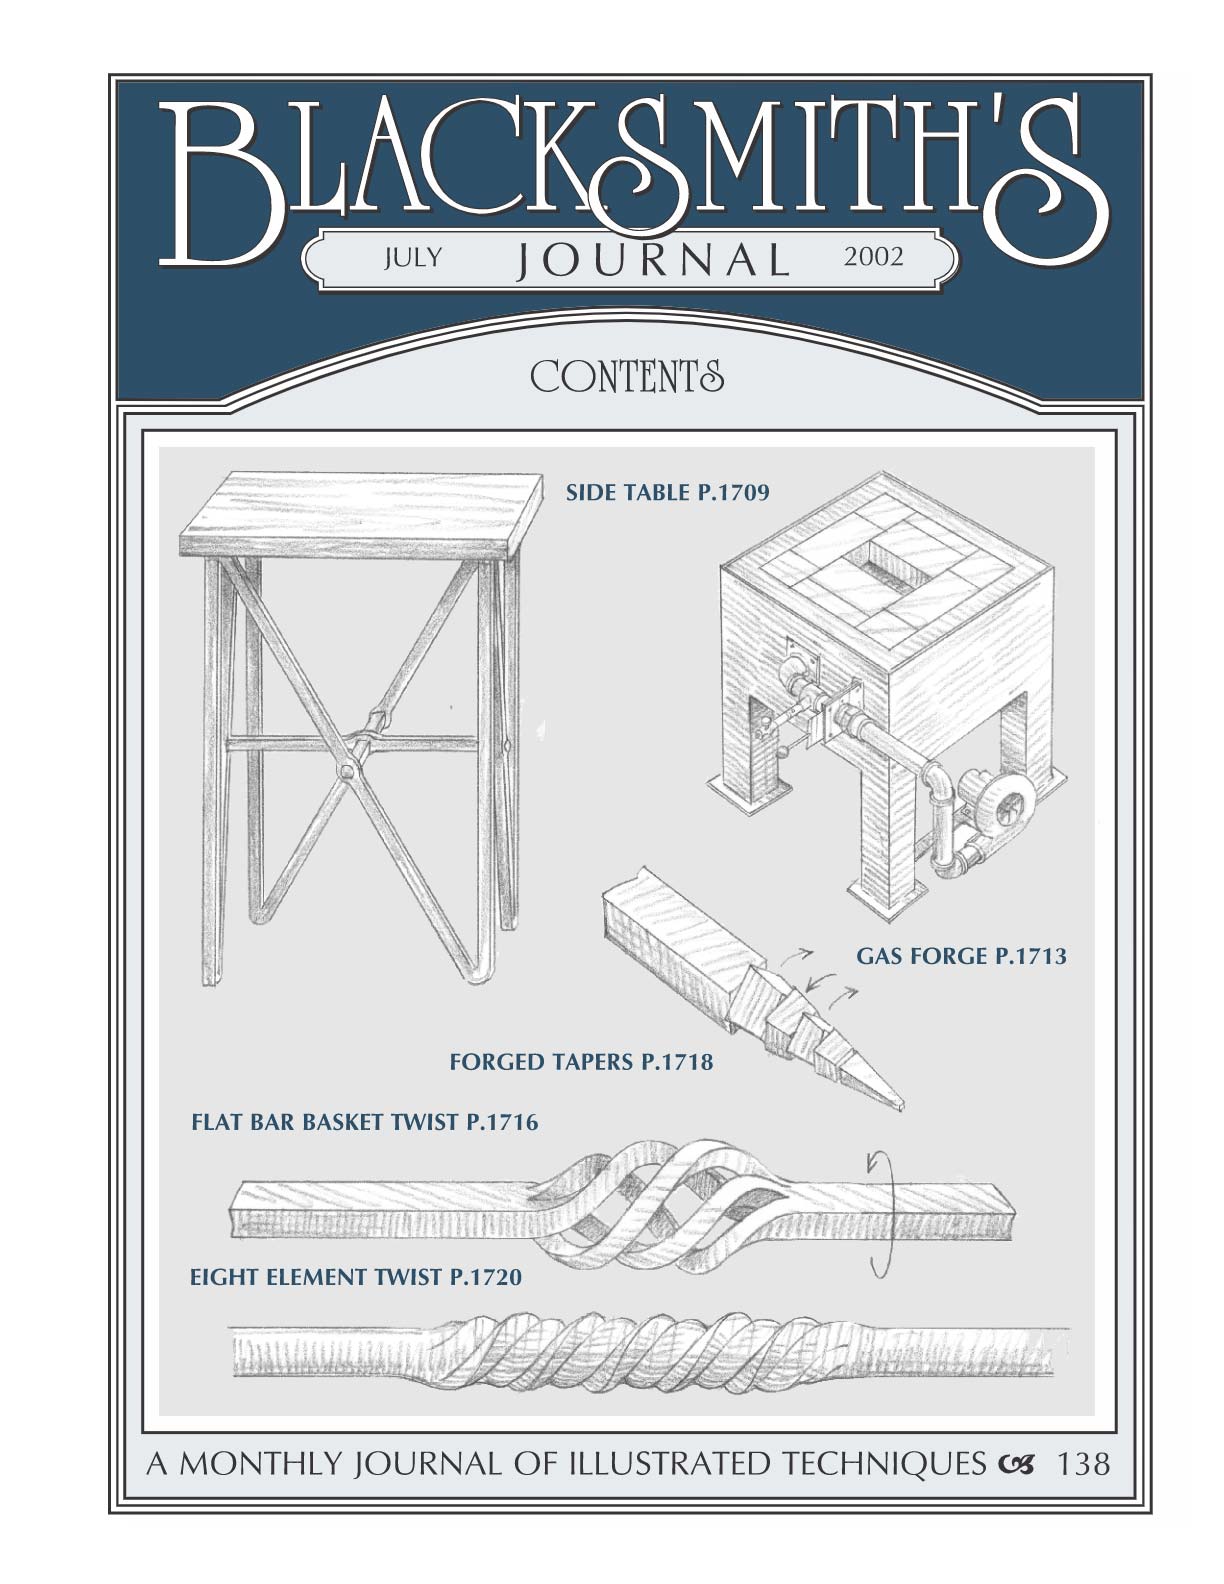 Cover image of Blacksmith's Journal with flat bar twist article.